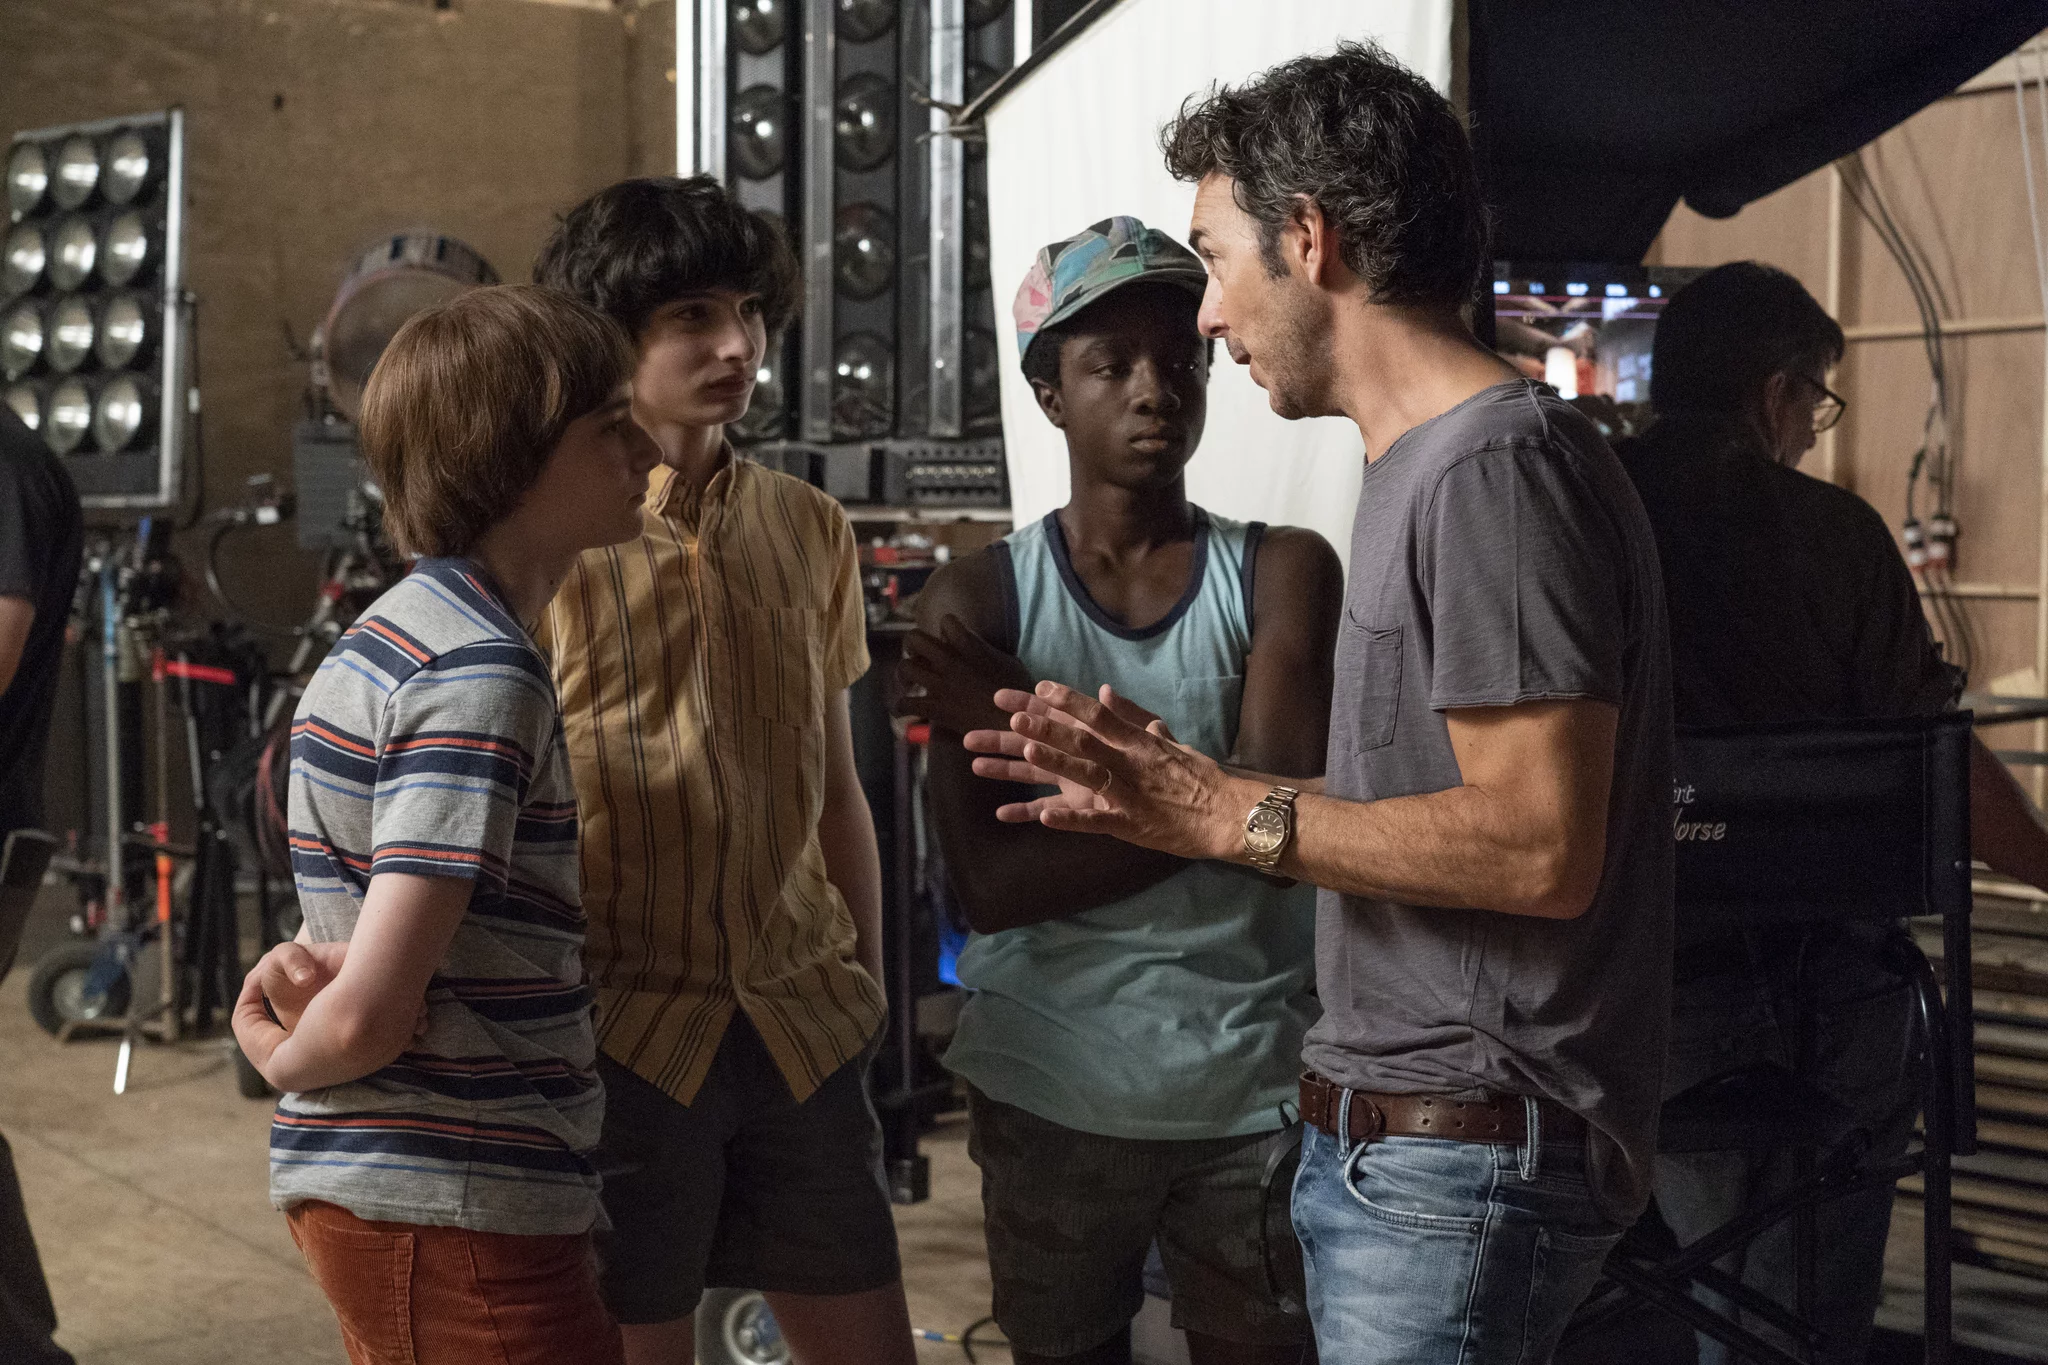 Shawn Levy on the sets of Stranger Things